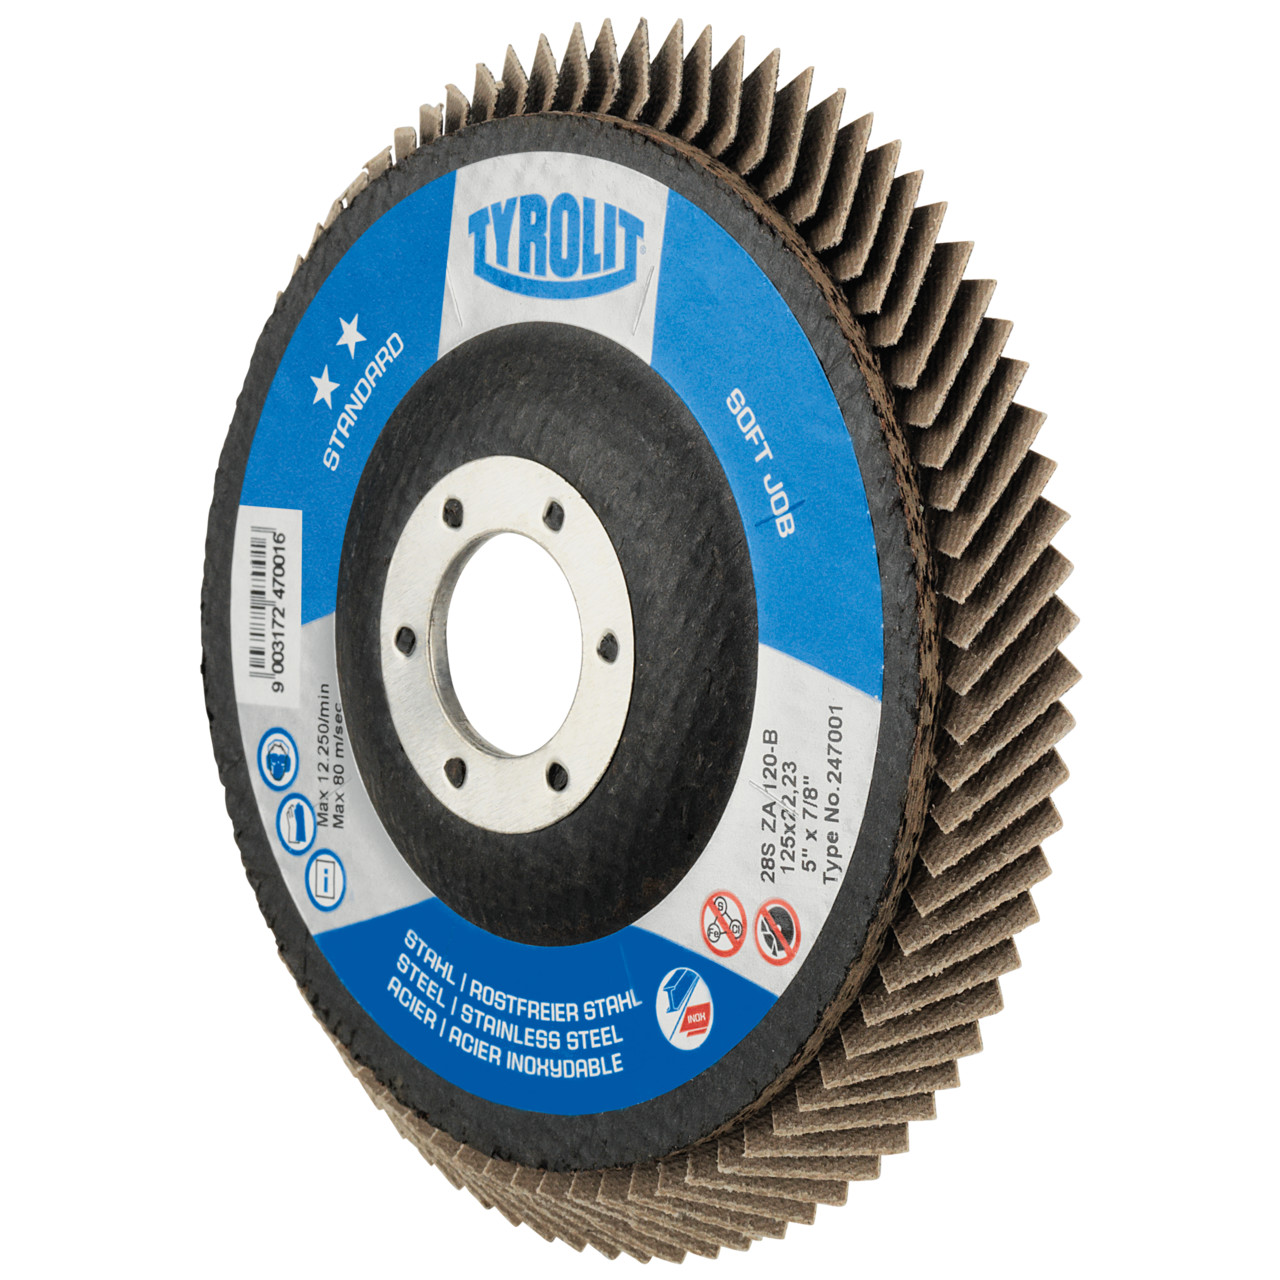 Tyrolit SOFTJOB DxH 115x22.23 2in1 for steel and stainless steel, P60, shape: 28S - straight version (SOFTJOB flap disc), Art. 246988